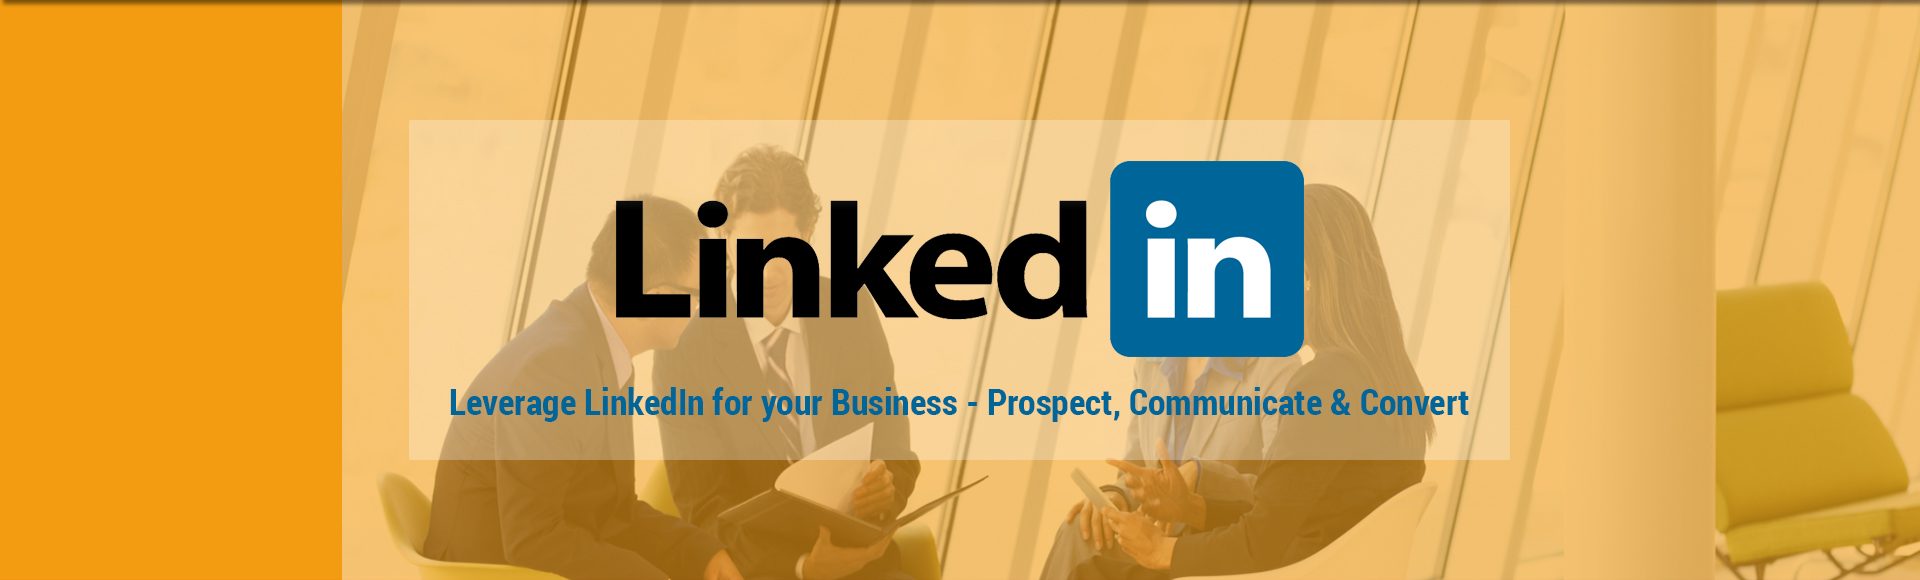 Download Free E-Book: How to promote business LinkedIn